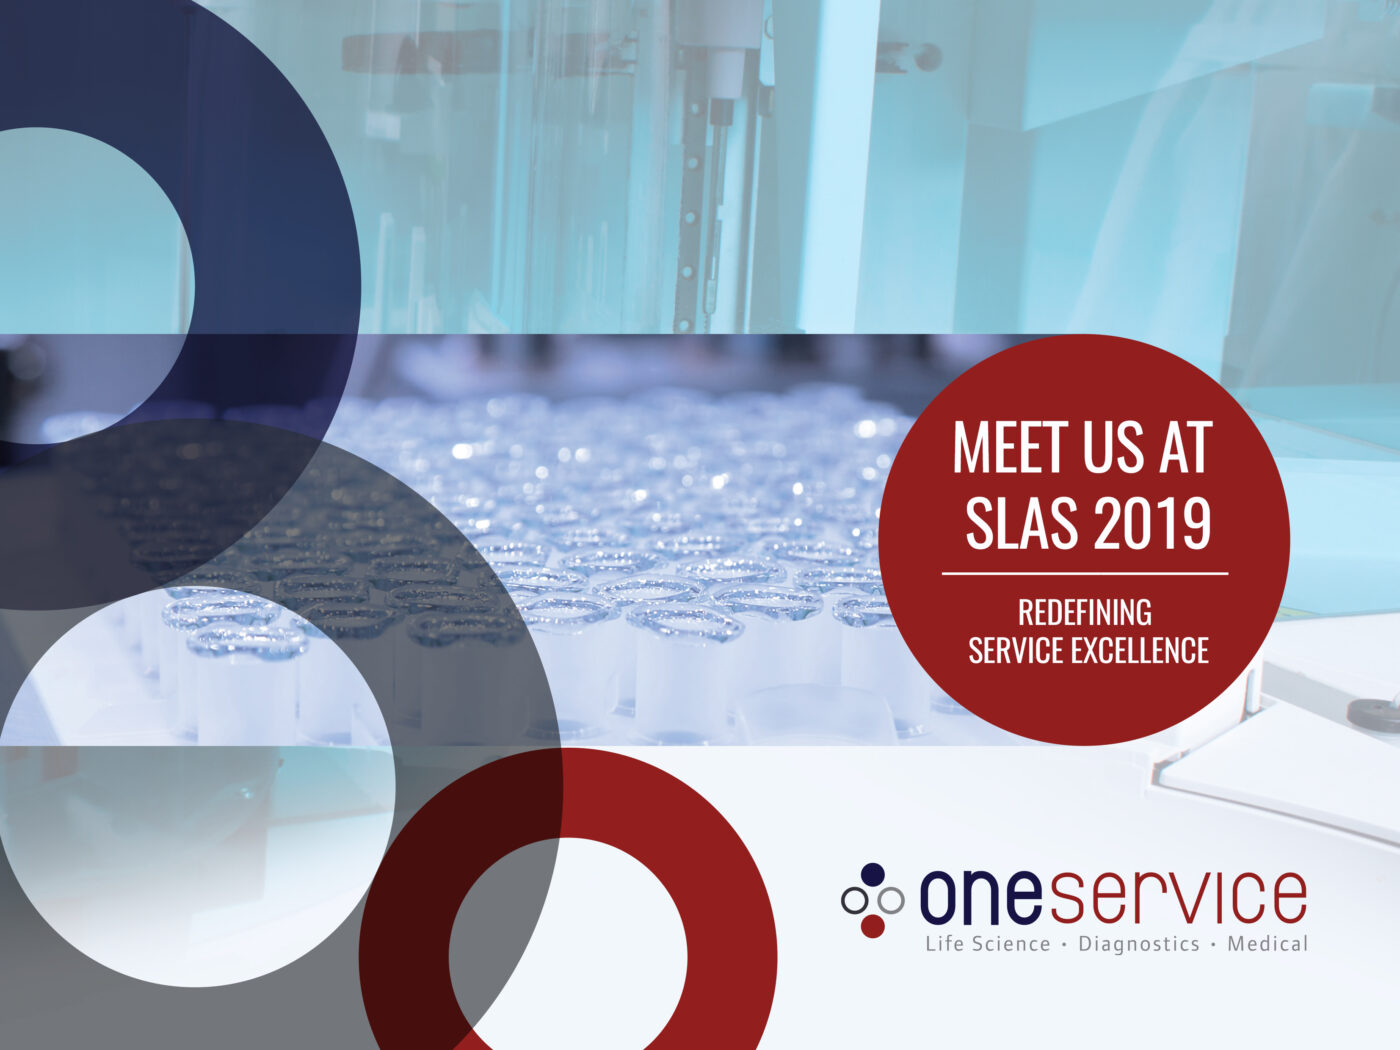 oneservice at SLAS Europe 2019